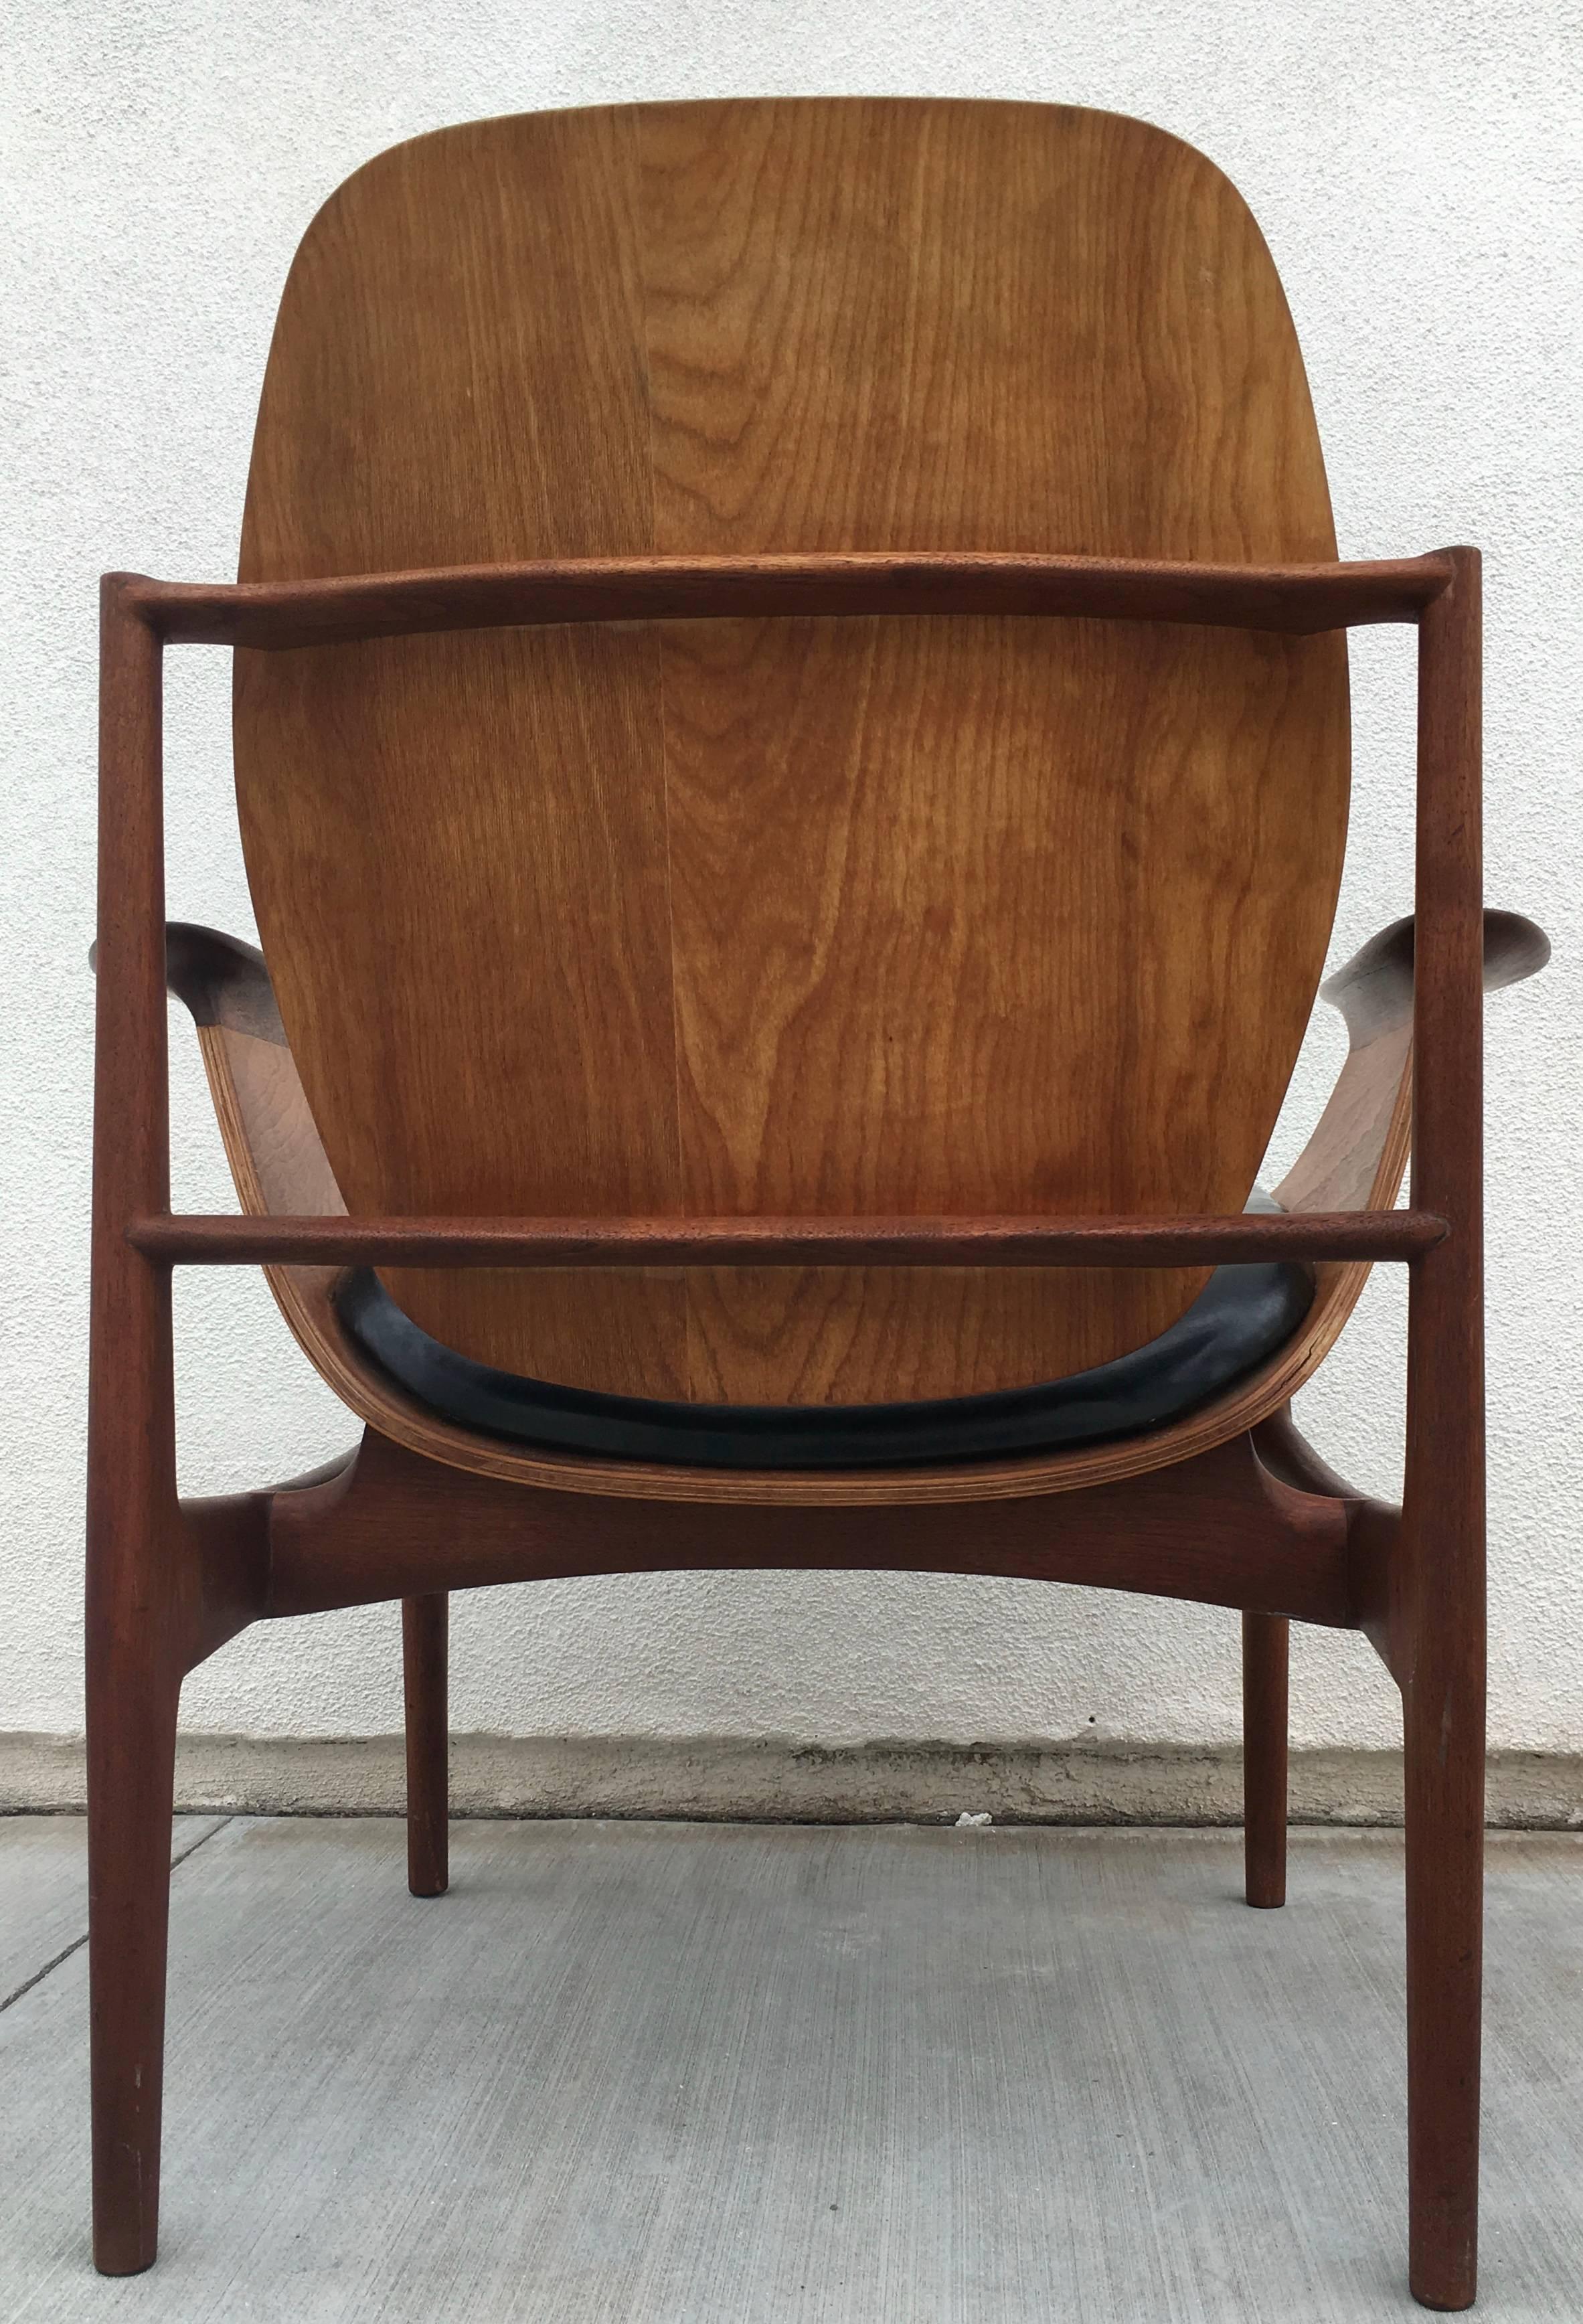 Stunning One off 1/1 Studio Chair by John McWilliams, California, circa 1960s For Sale 2